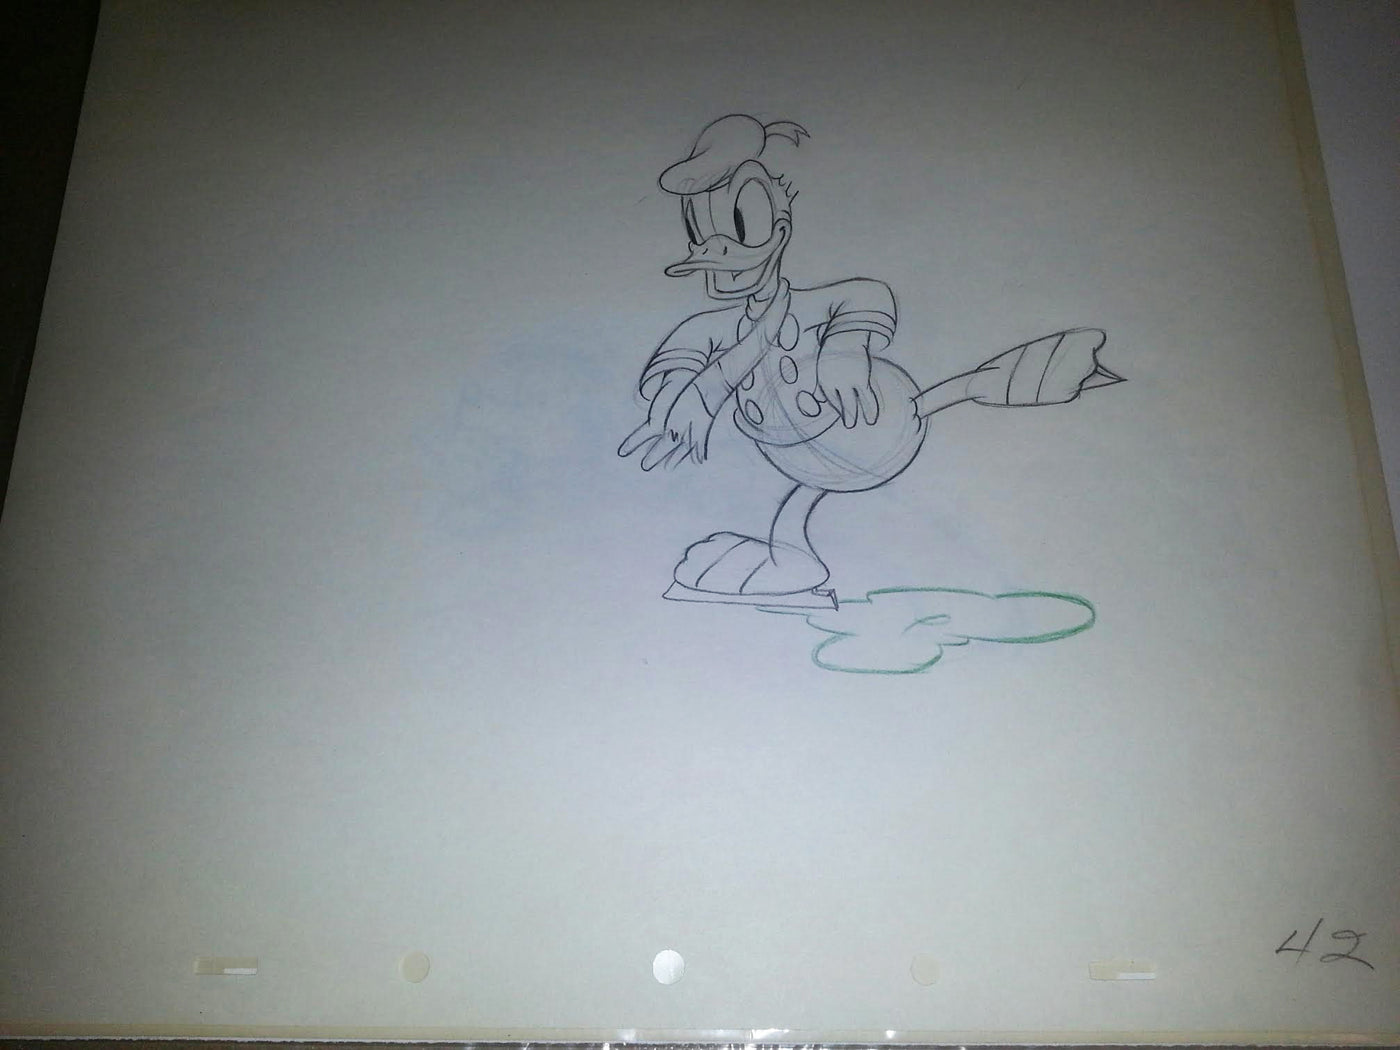 Original Walt Disney Production Drawing from The Hockey Champ (1939) featuring Donald Duck